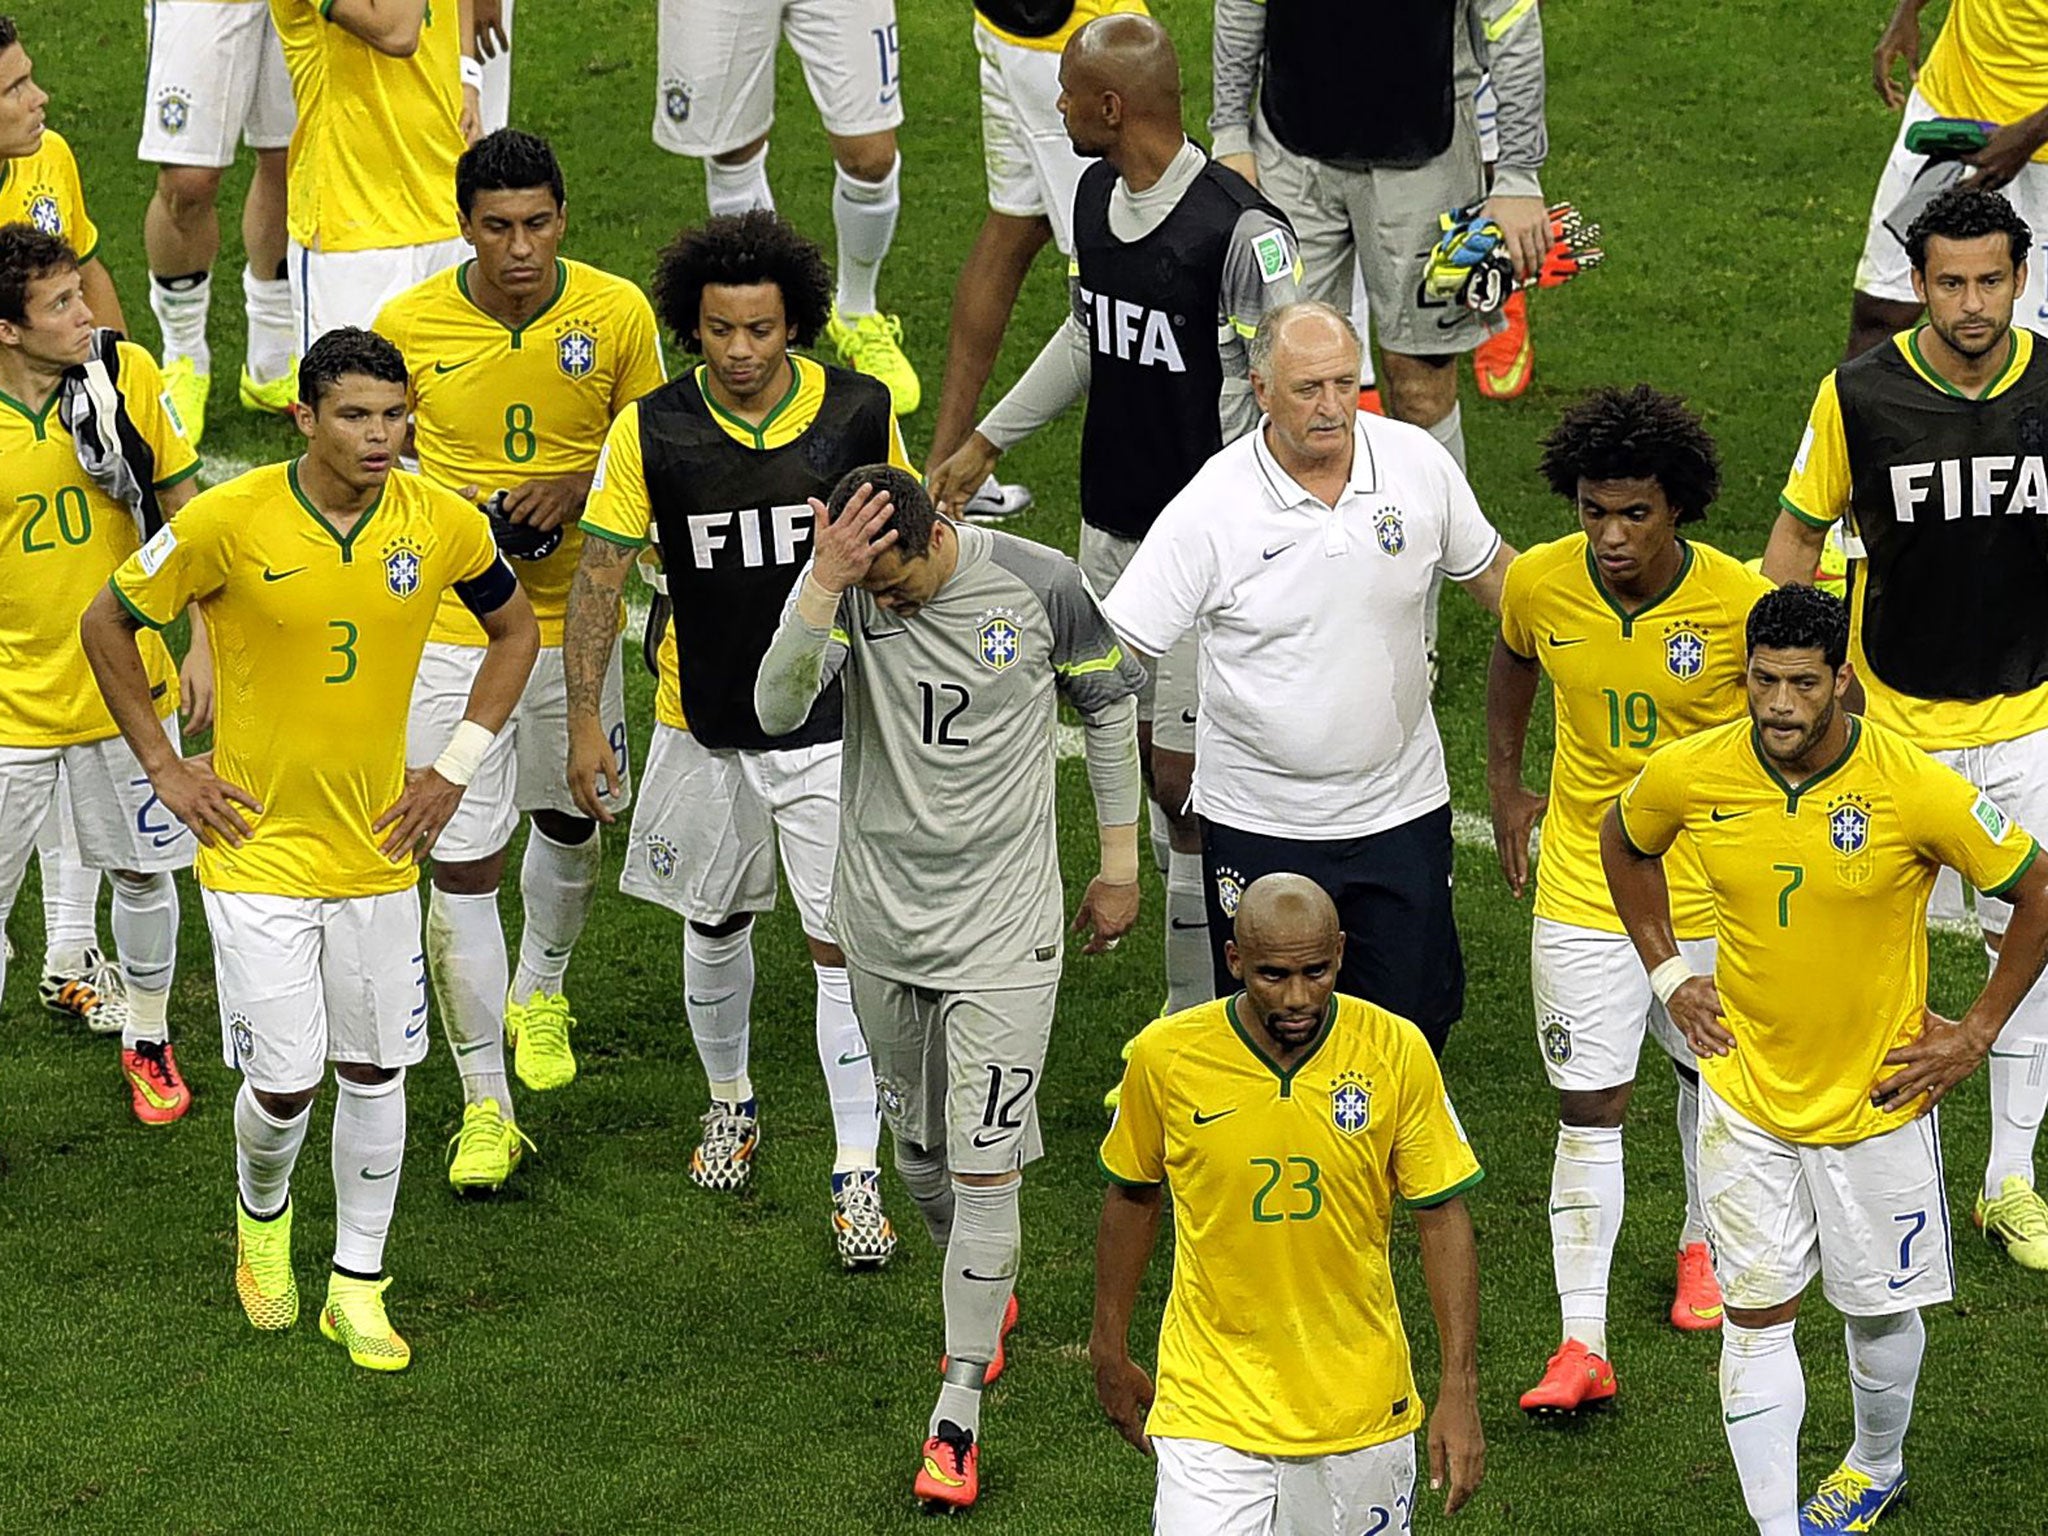 Luiz Felipe Scolari and his players leave the pitch after their 3-0 third-place play-off defeat to the Netherlands